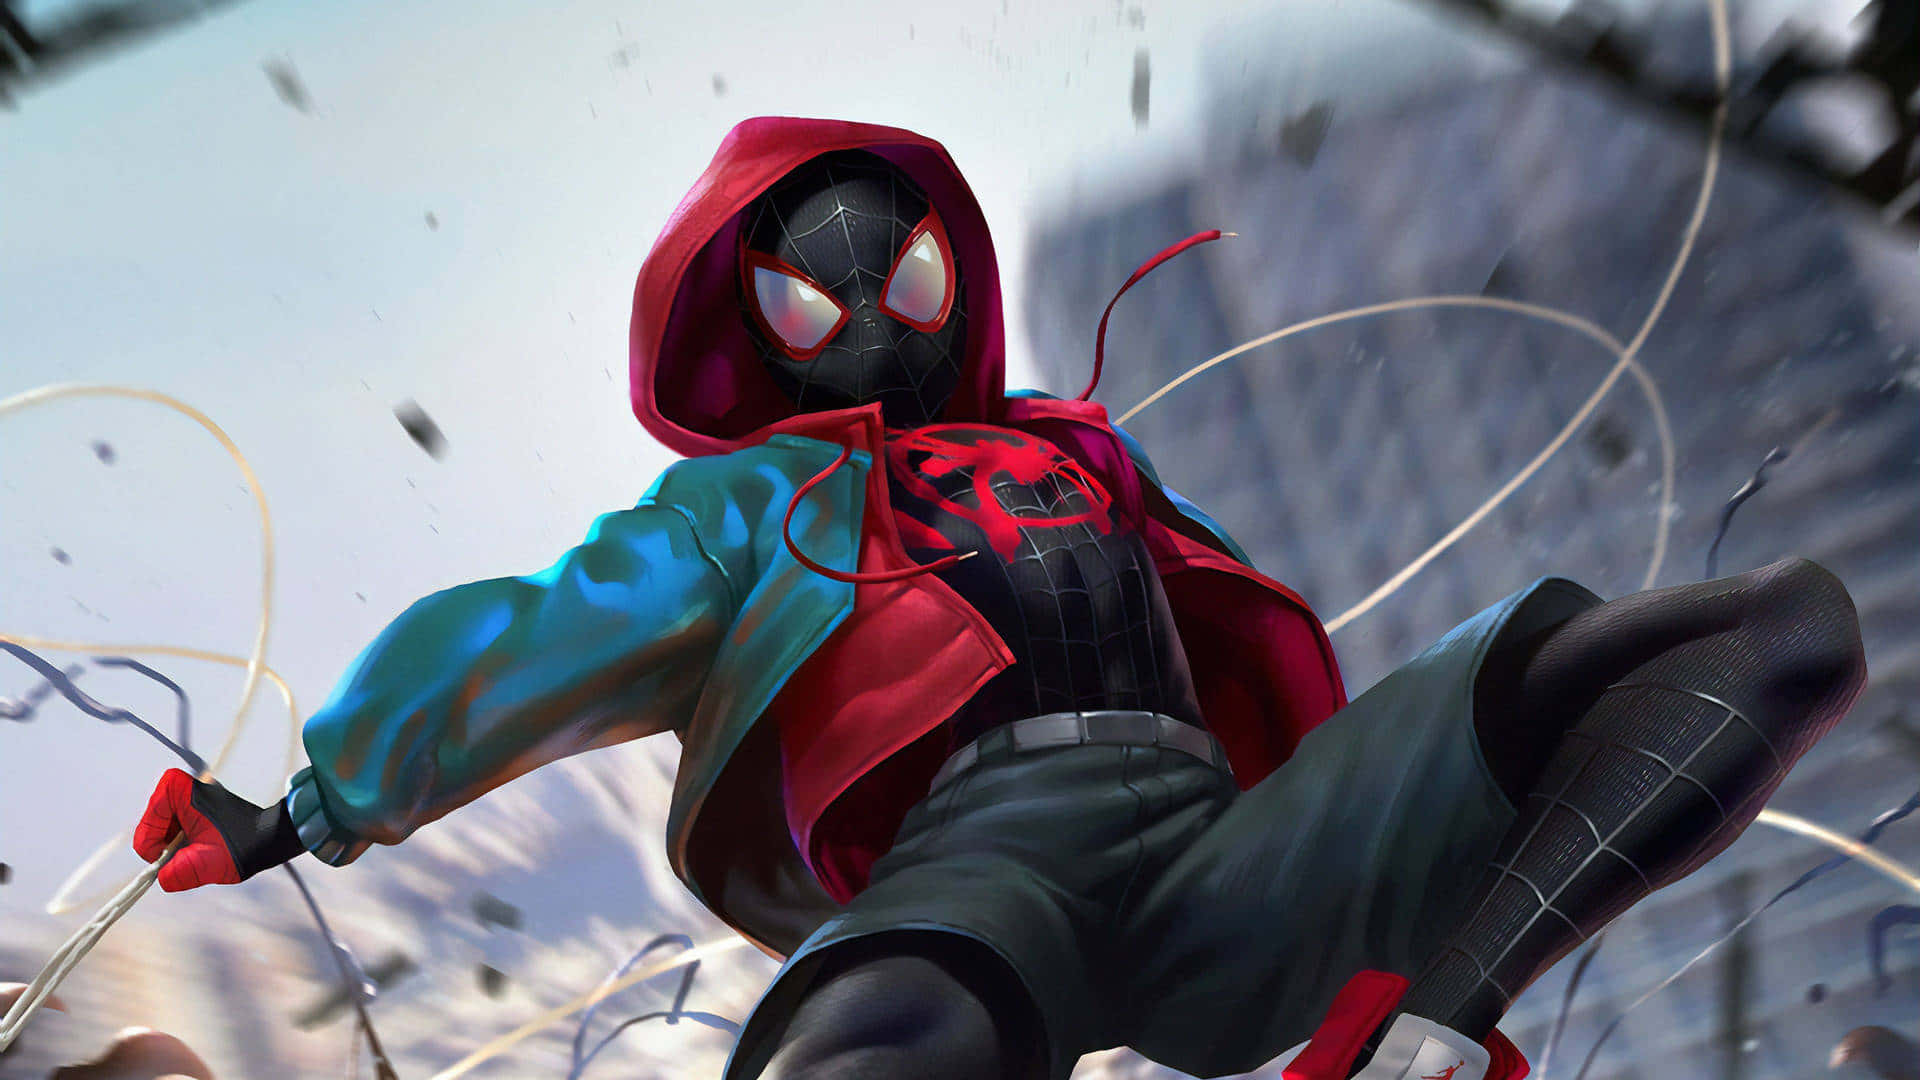 Inspired by his hero, Miles Morales puts on the Spider-Man suit!